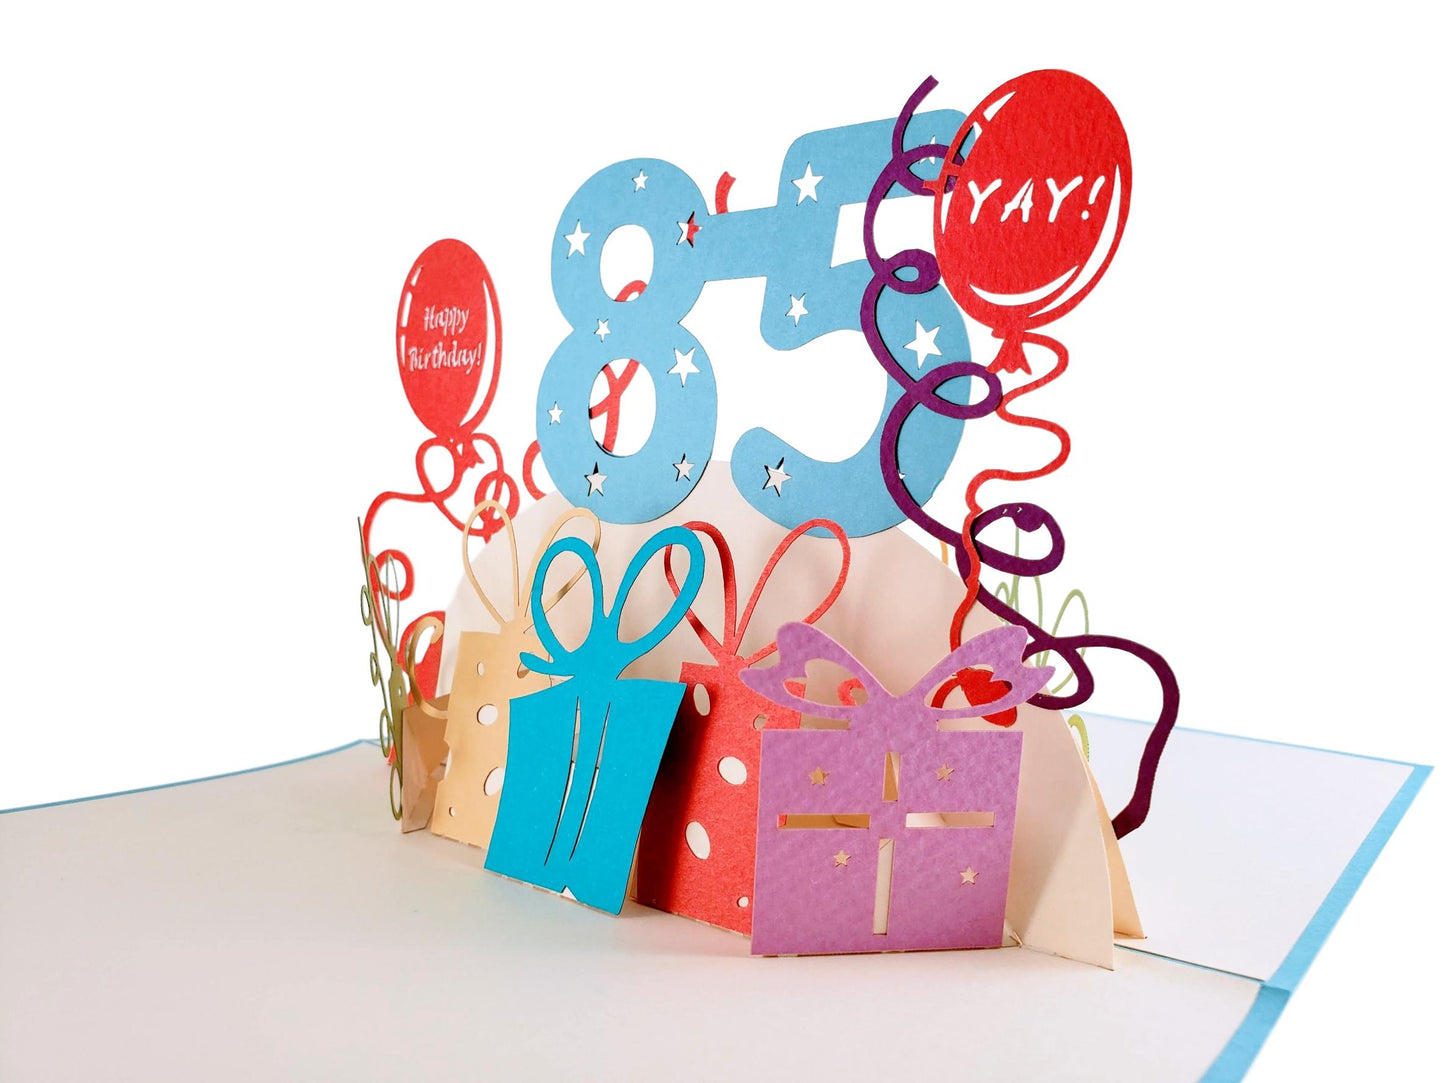 Happy 85th Birthday With Lots of Presents 3D Pop Up Greeting Card - Age - best deal - Birthday - iGifts And Cards